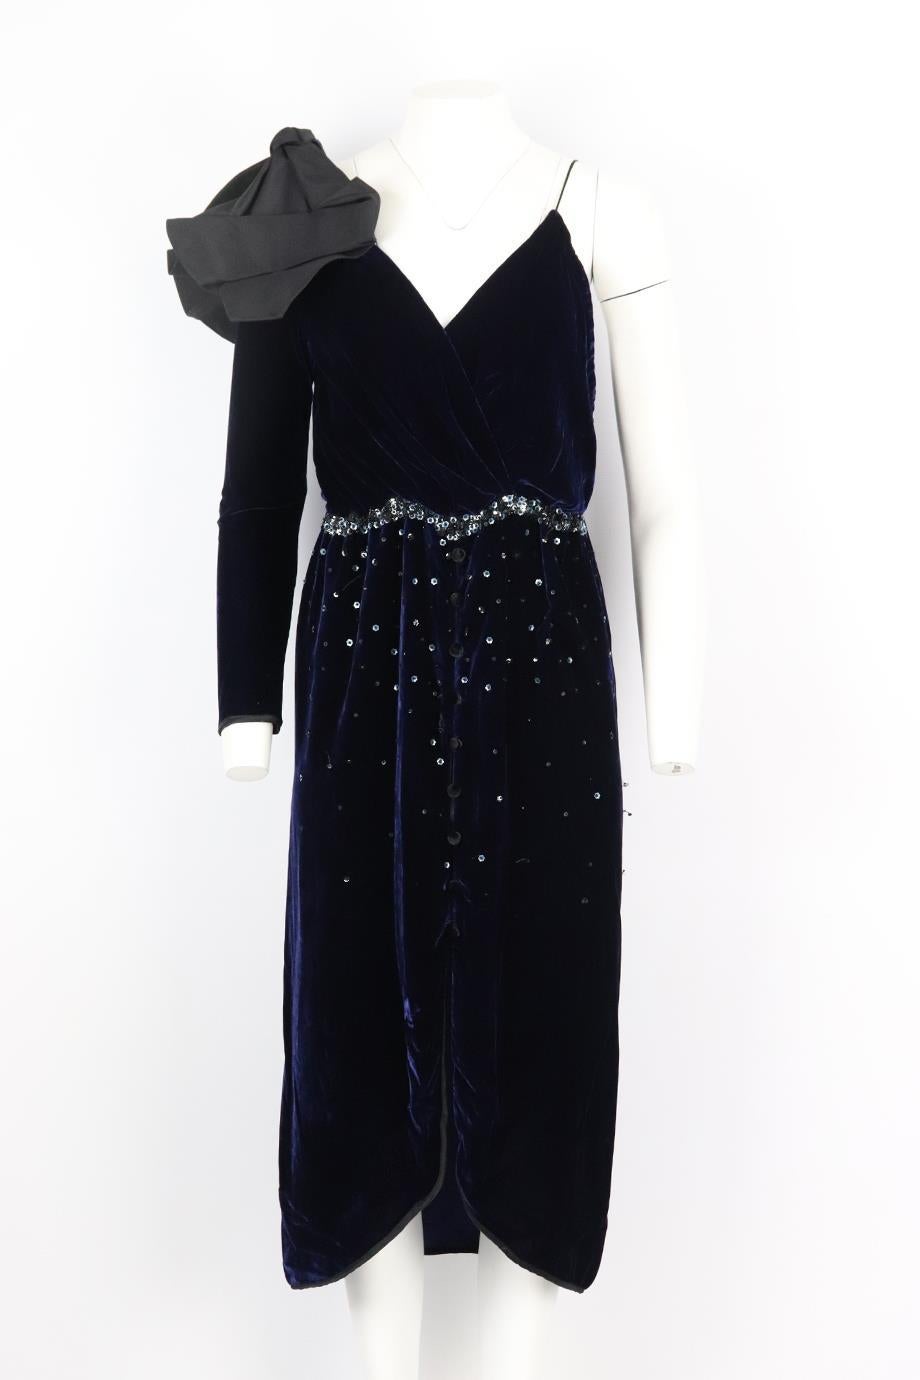 Johanna Ortiz embellished wrap effect velvet midi dress. Black and navy. Sleeveless, v-neck. Zip fastening at back. 68% Rayon, 32% silk. Size: US 4 (UK 8, FR 36, IT 40). Bust: 30 in. Waist: 28 in. Hips: 39 in. Length: 46.5 in. Very good condition -